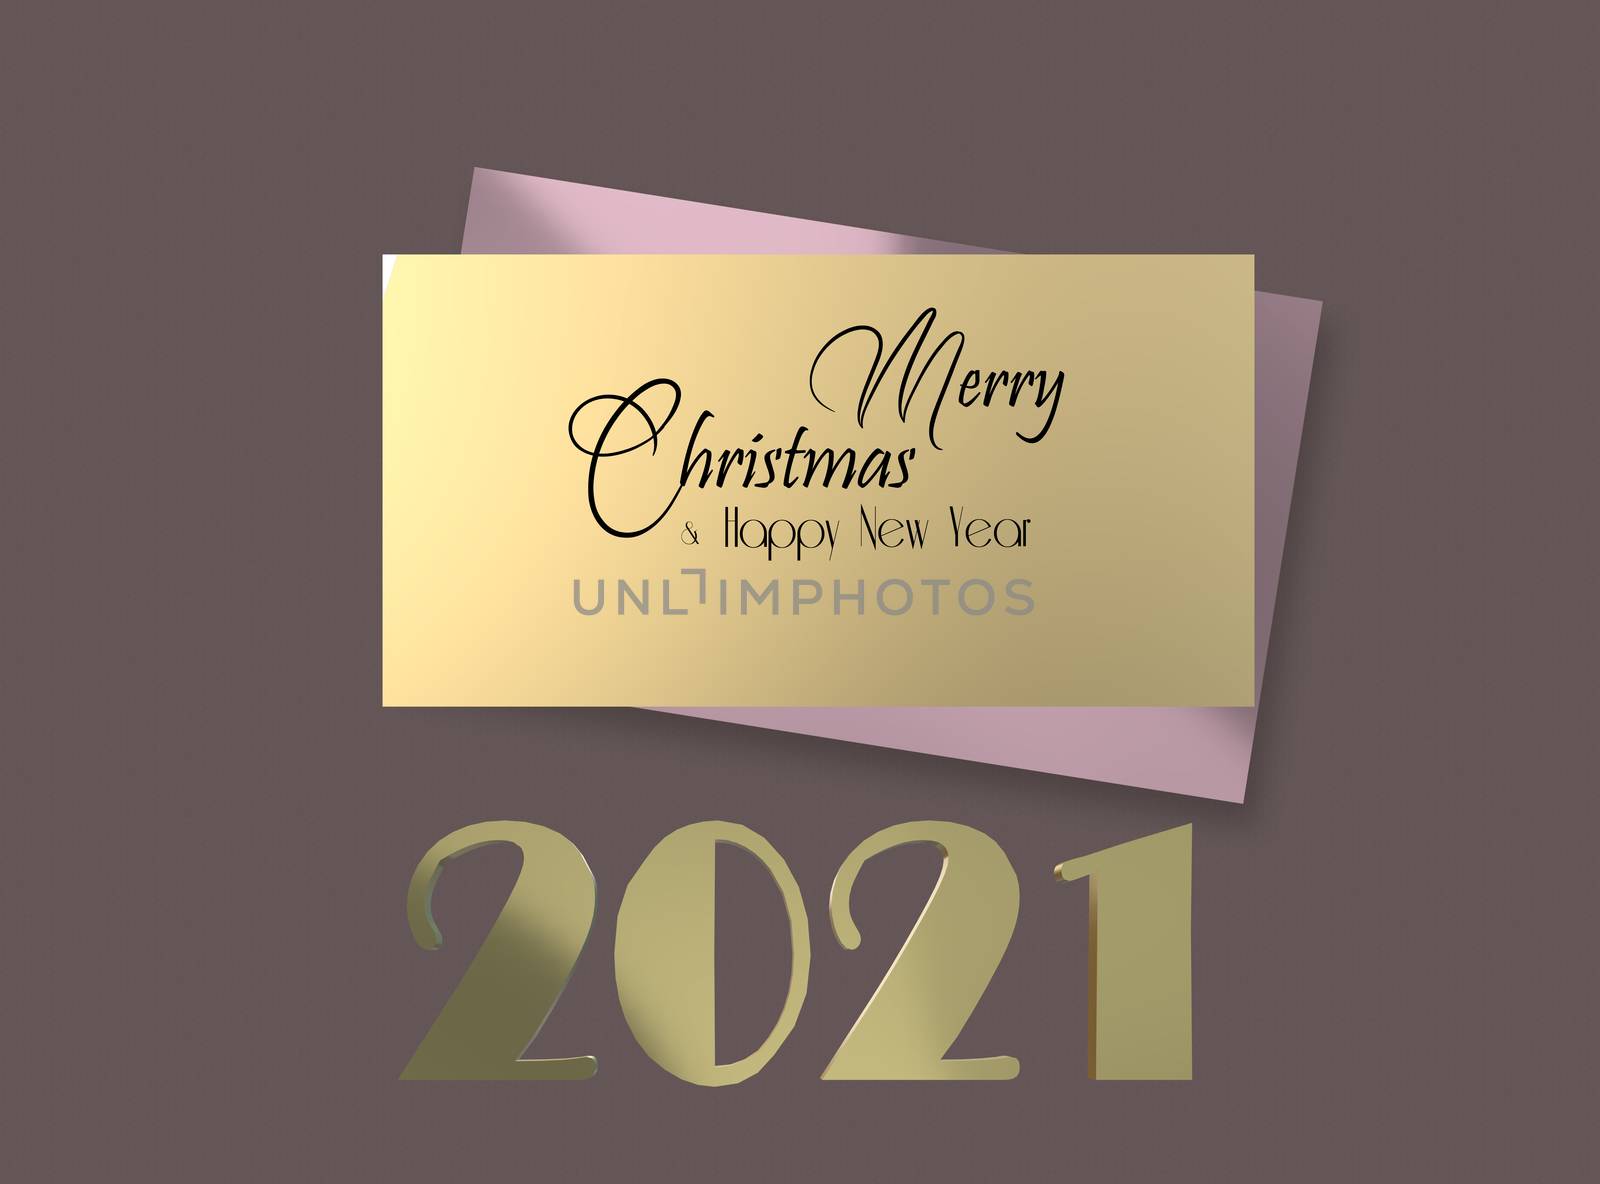 Abstract New Year 2021 greeting card with gold Xmas gift tag with text Merry Christmas Happy New Year, golden digit 2021 on pastel brown background. 3D render